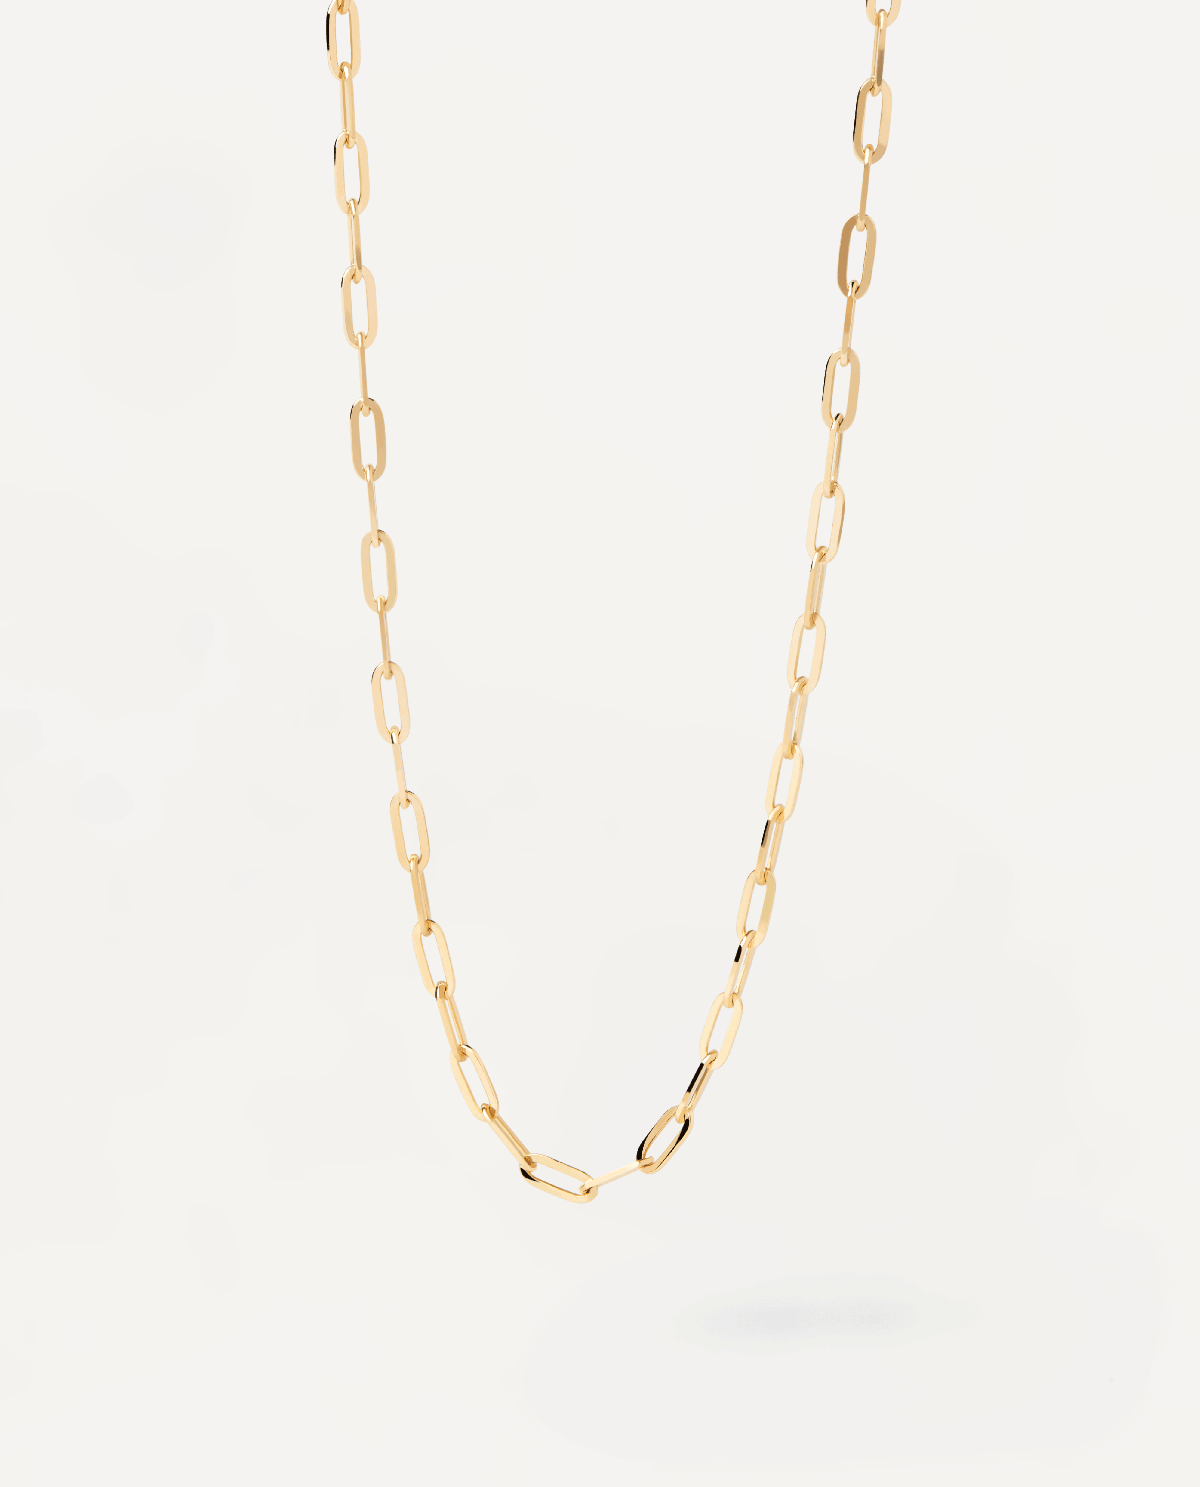 Gold Persian Chain Necklace | Shop Gemstone, Gold and Silver Jewelry